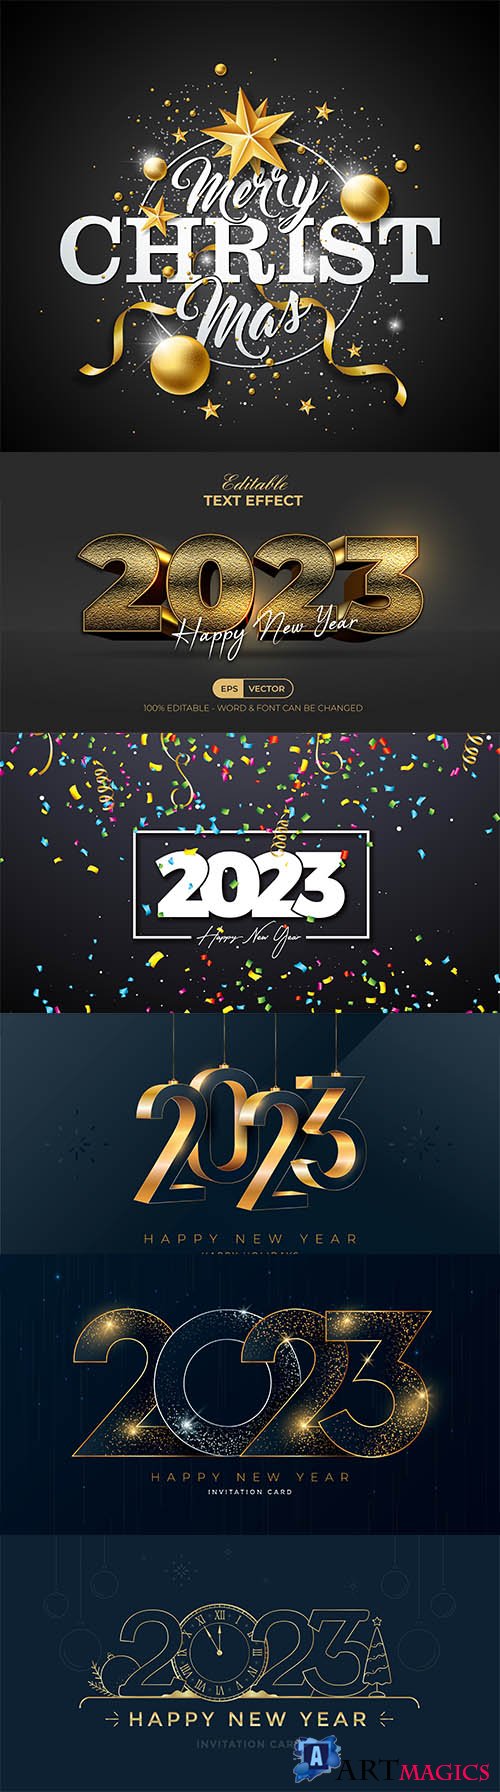 2023 illustration with gold lettering and party balloon on dark background